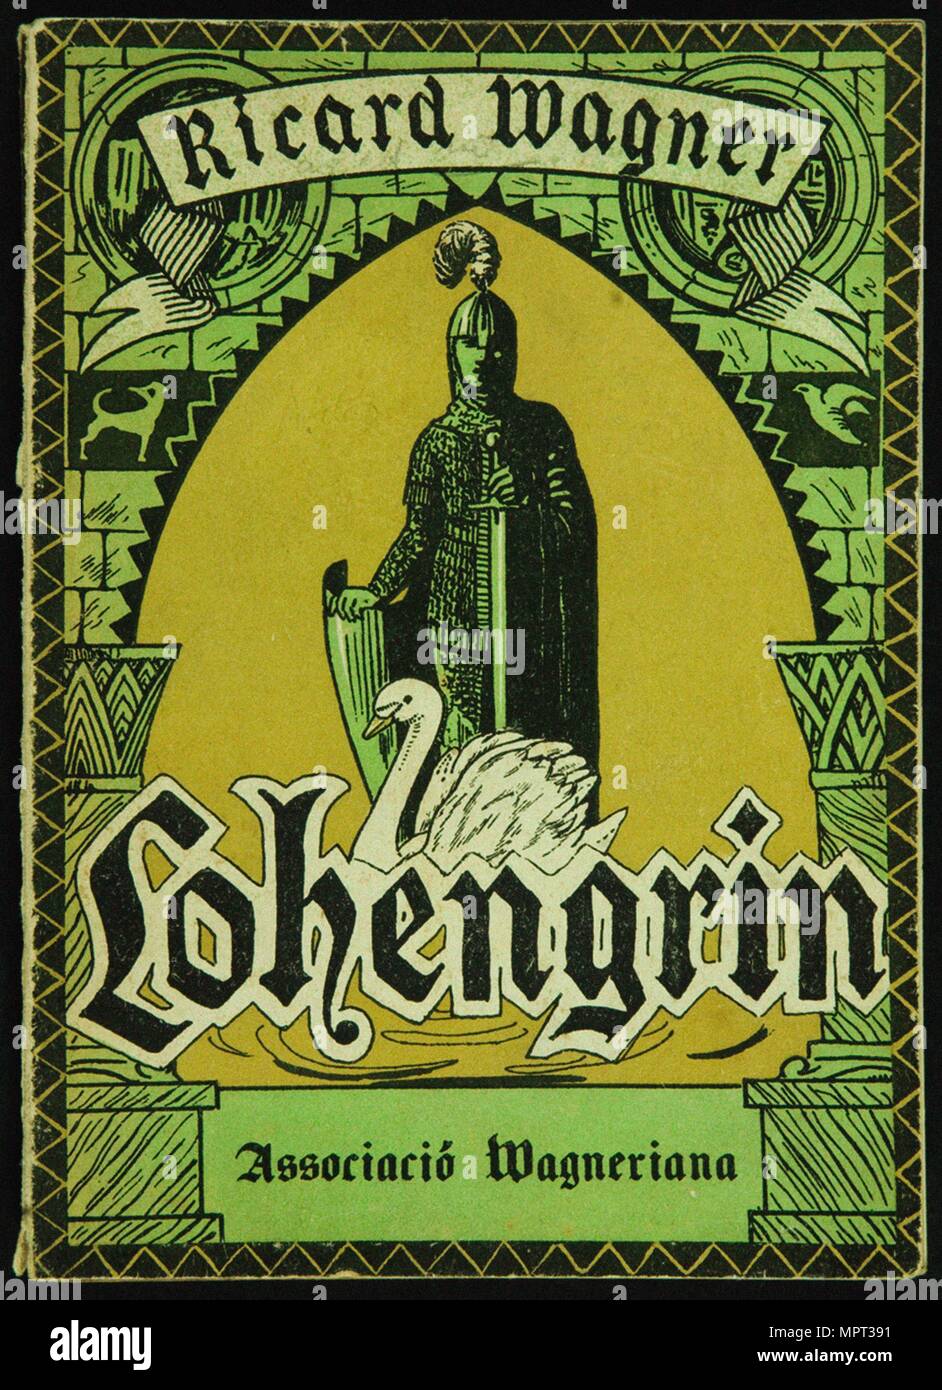 Cover of the Libretto of Lohengrin by Richard Wagner. Barcelona, Associació Wagneriana, 1926. Stock Photo